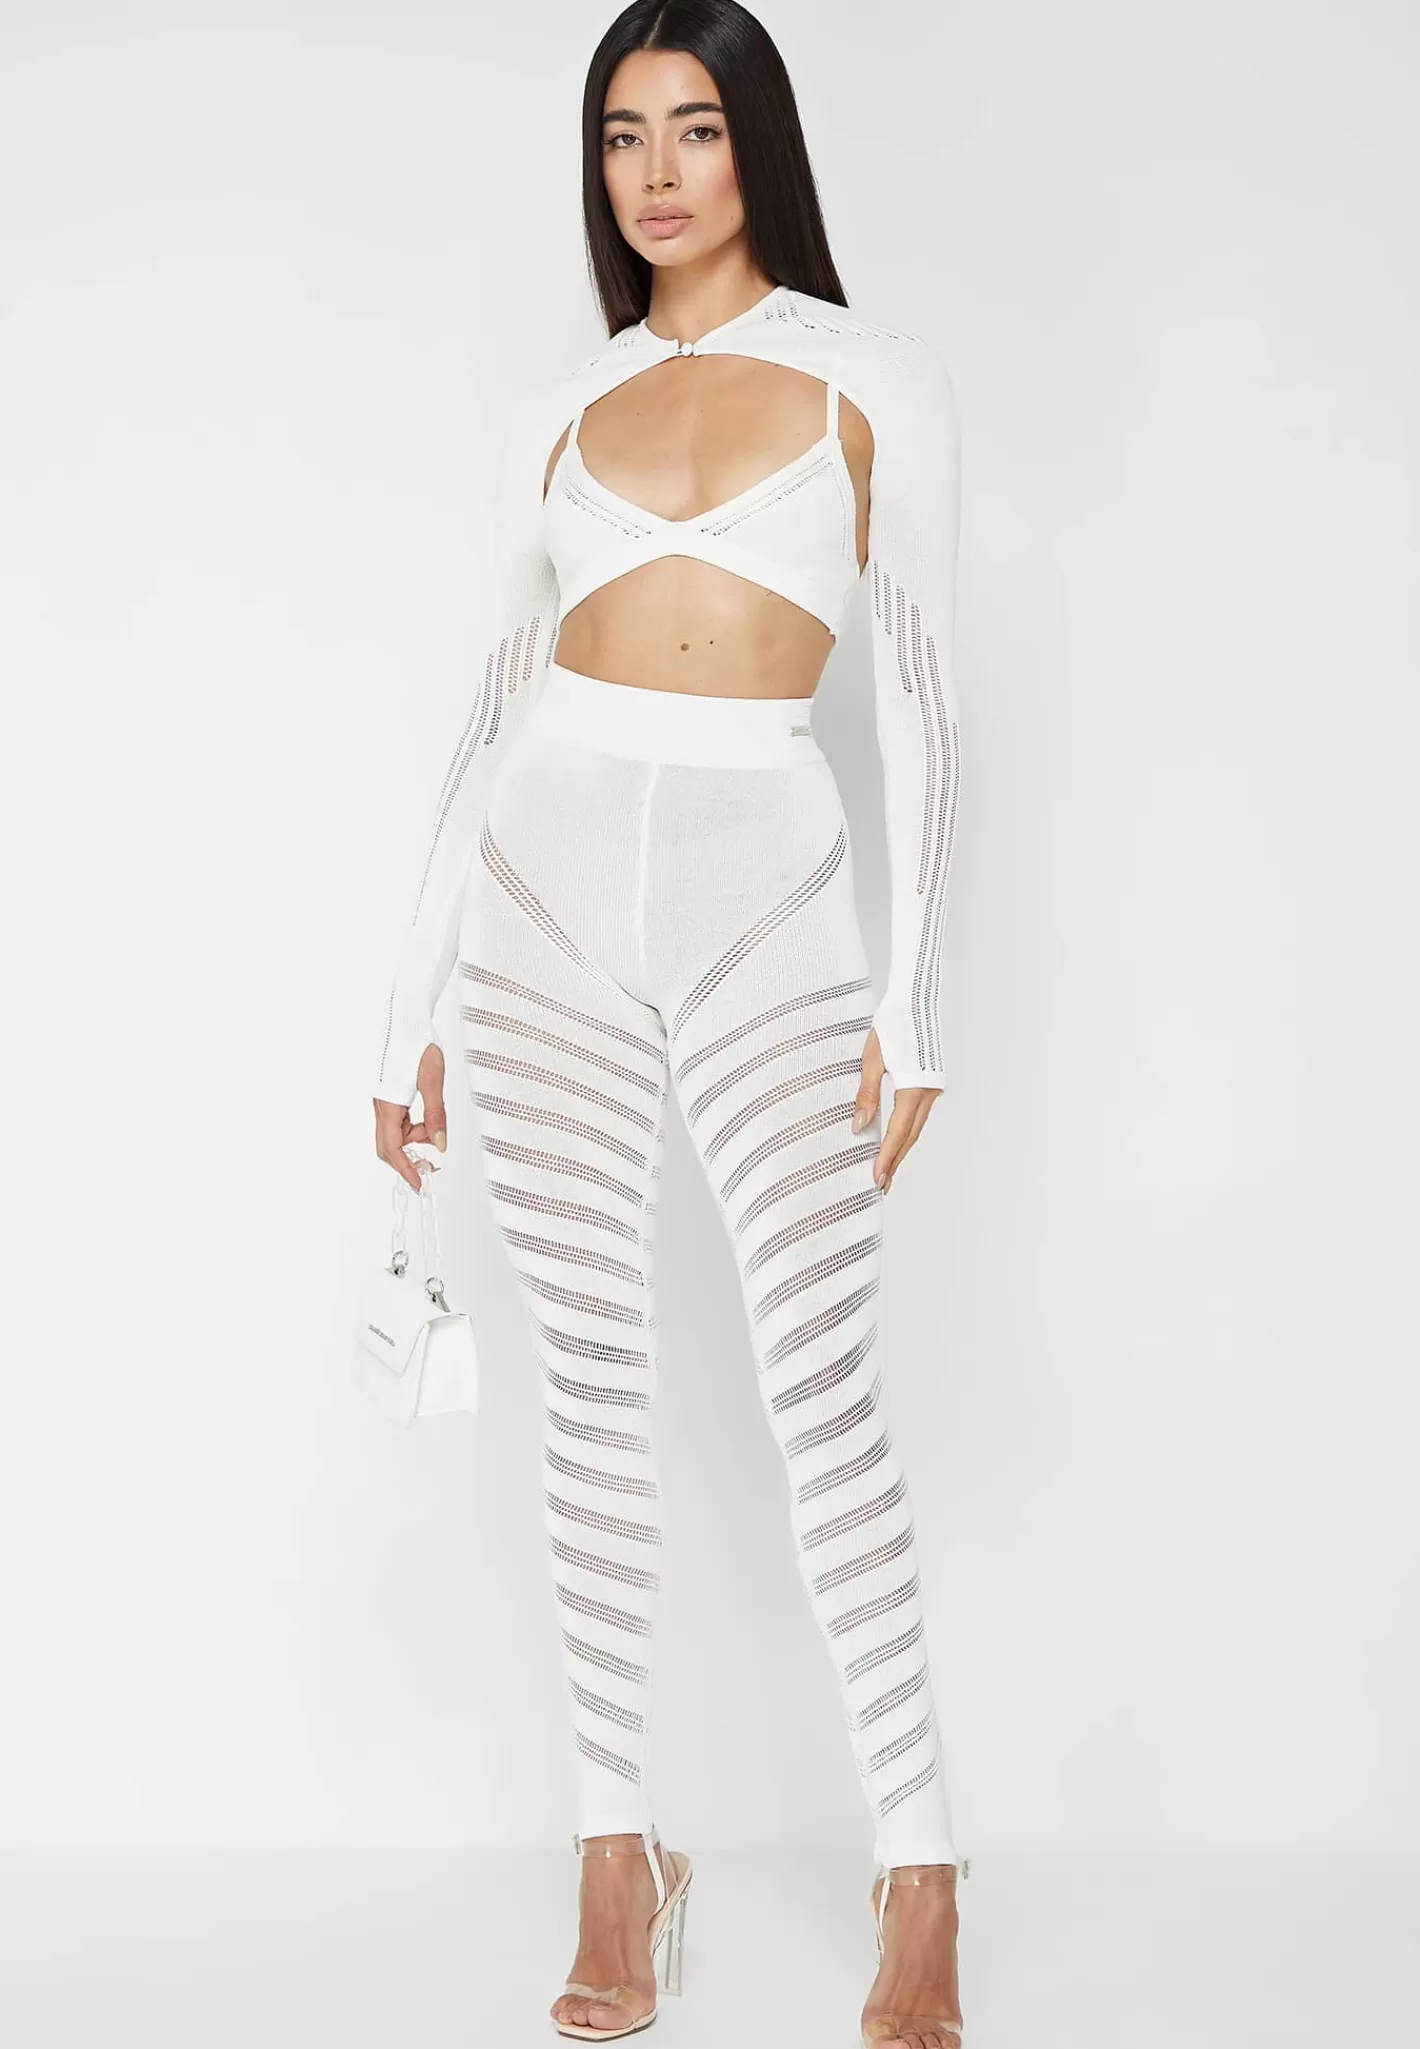 Knitted Sleeve Overlay with Bralette - White-Manière De Voir Online